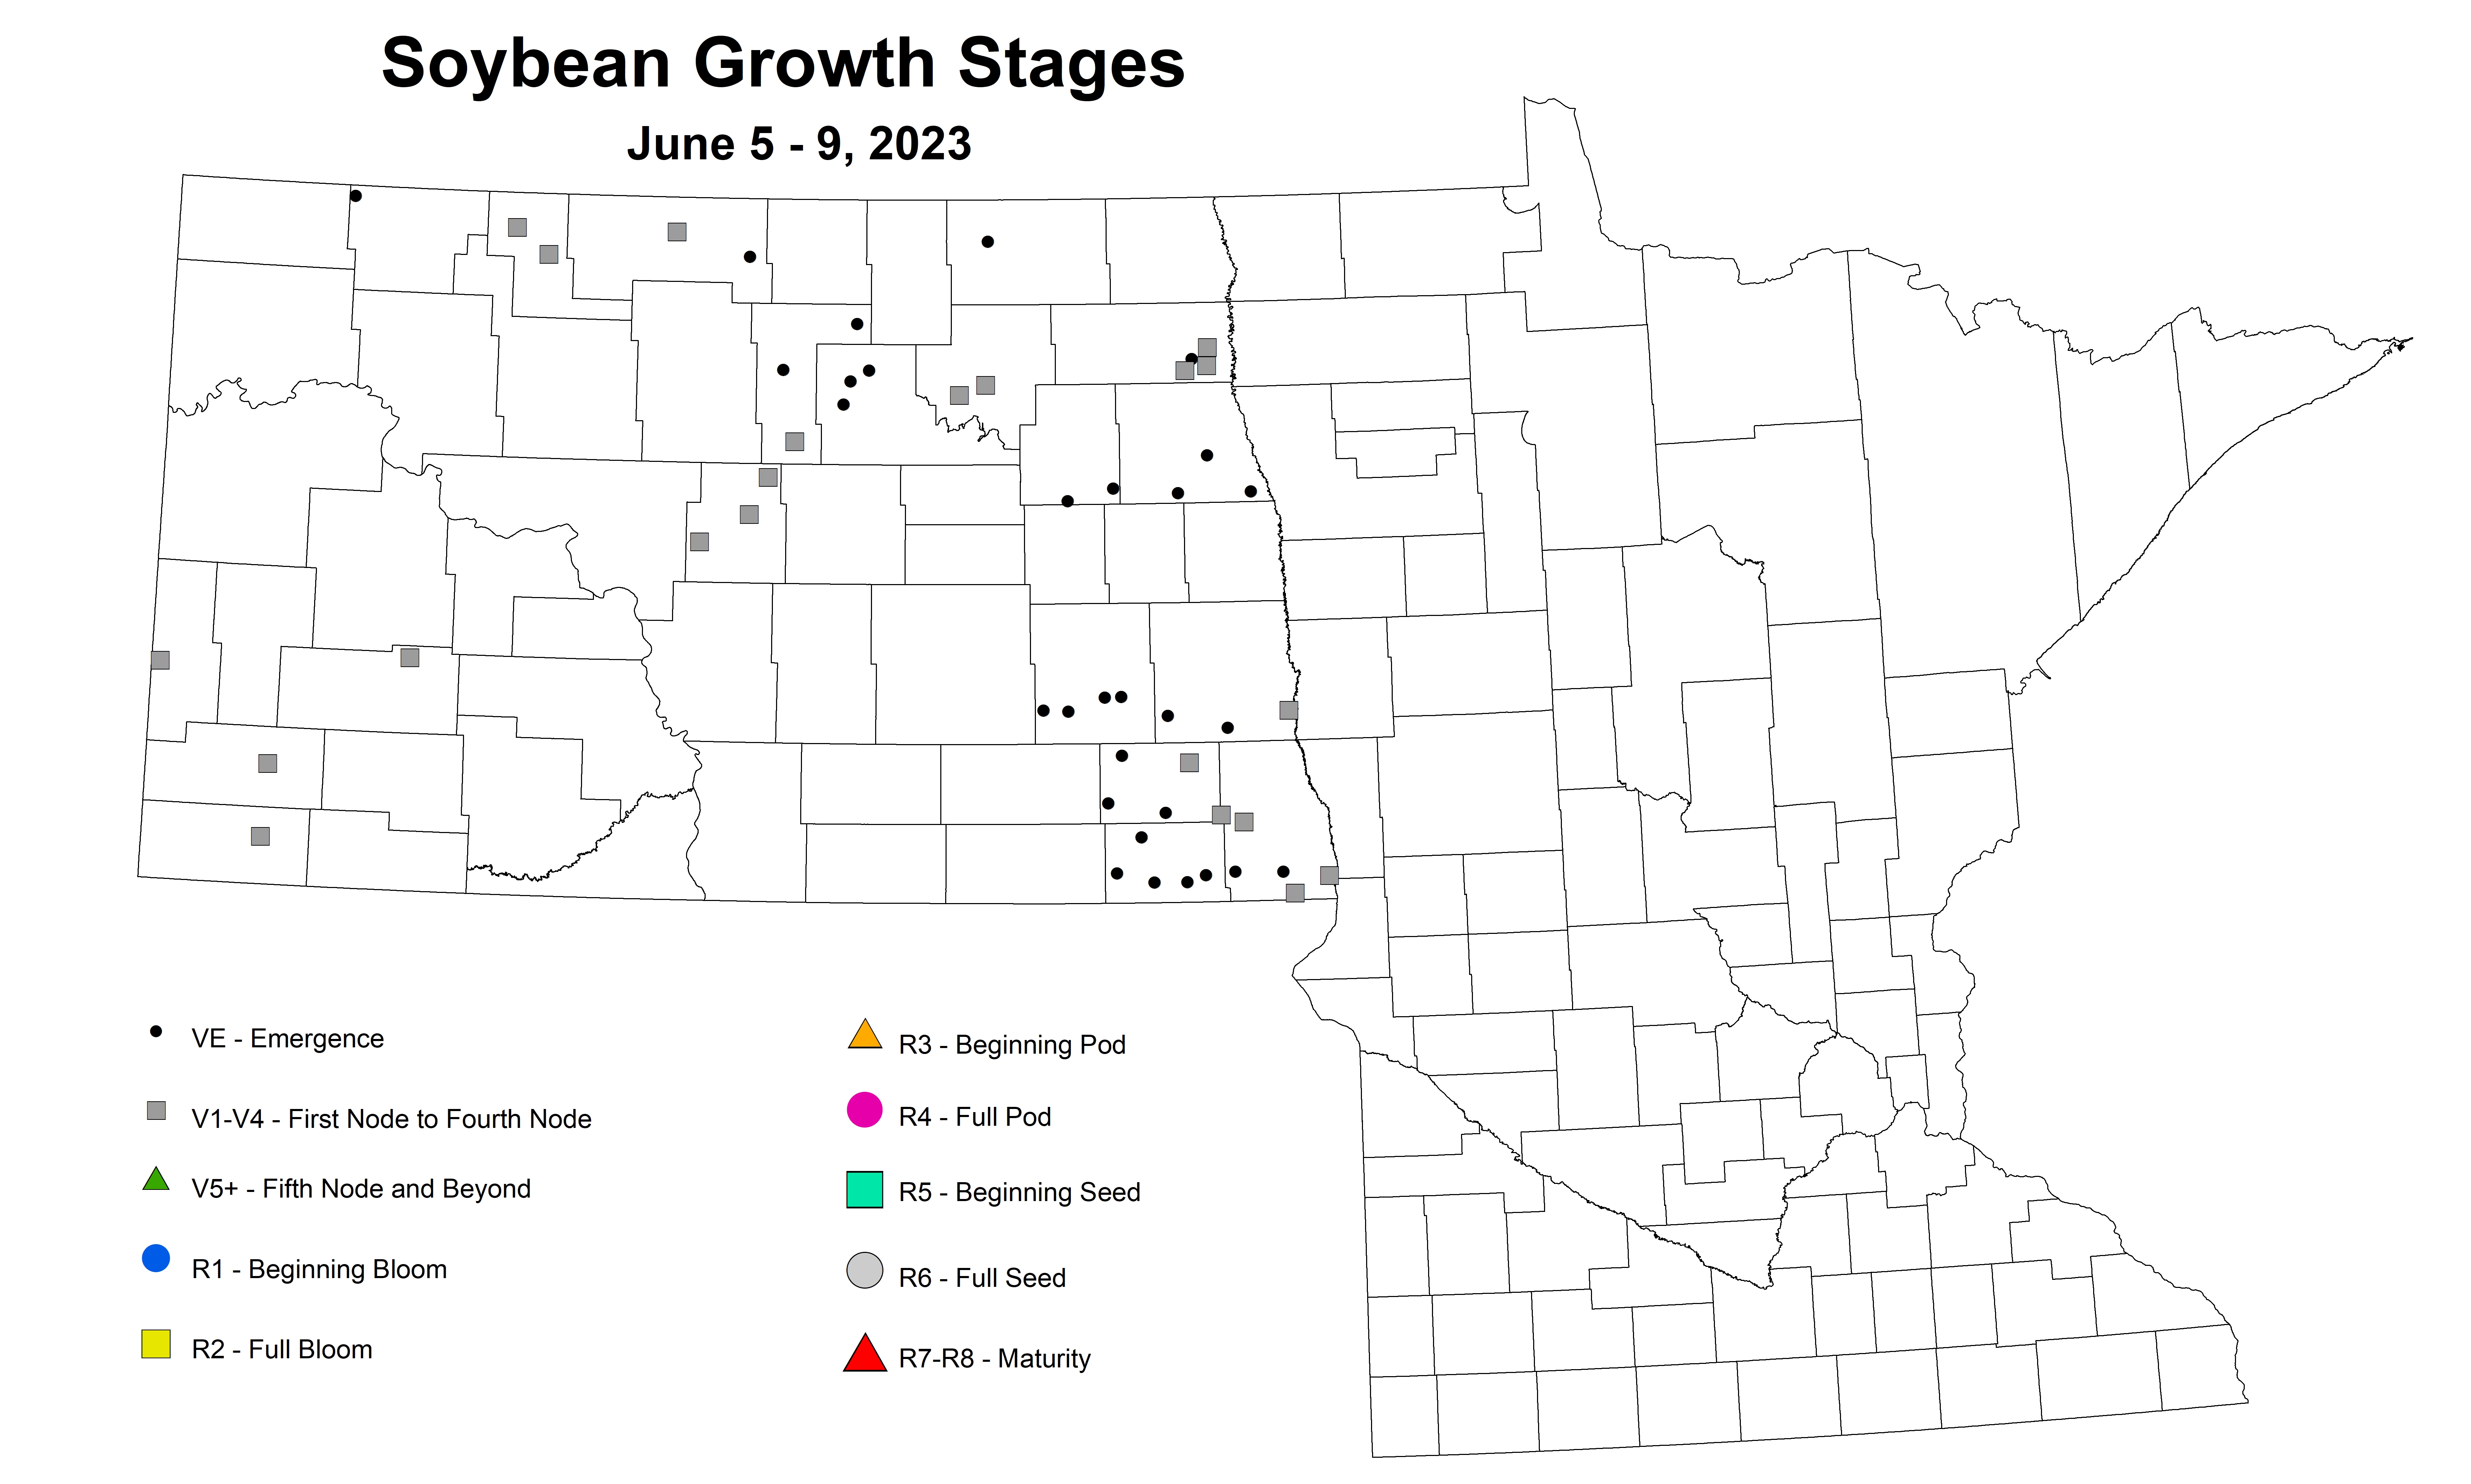 soybean growth stages June 5-9 2023